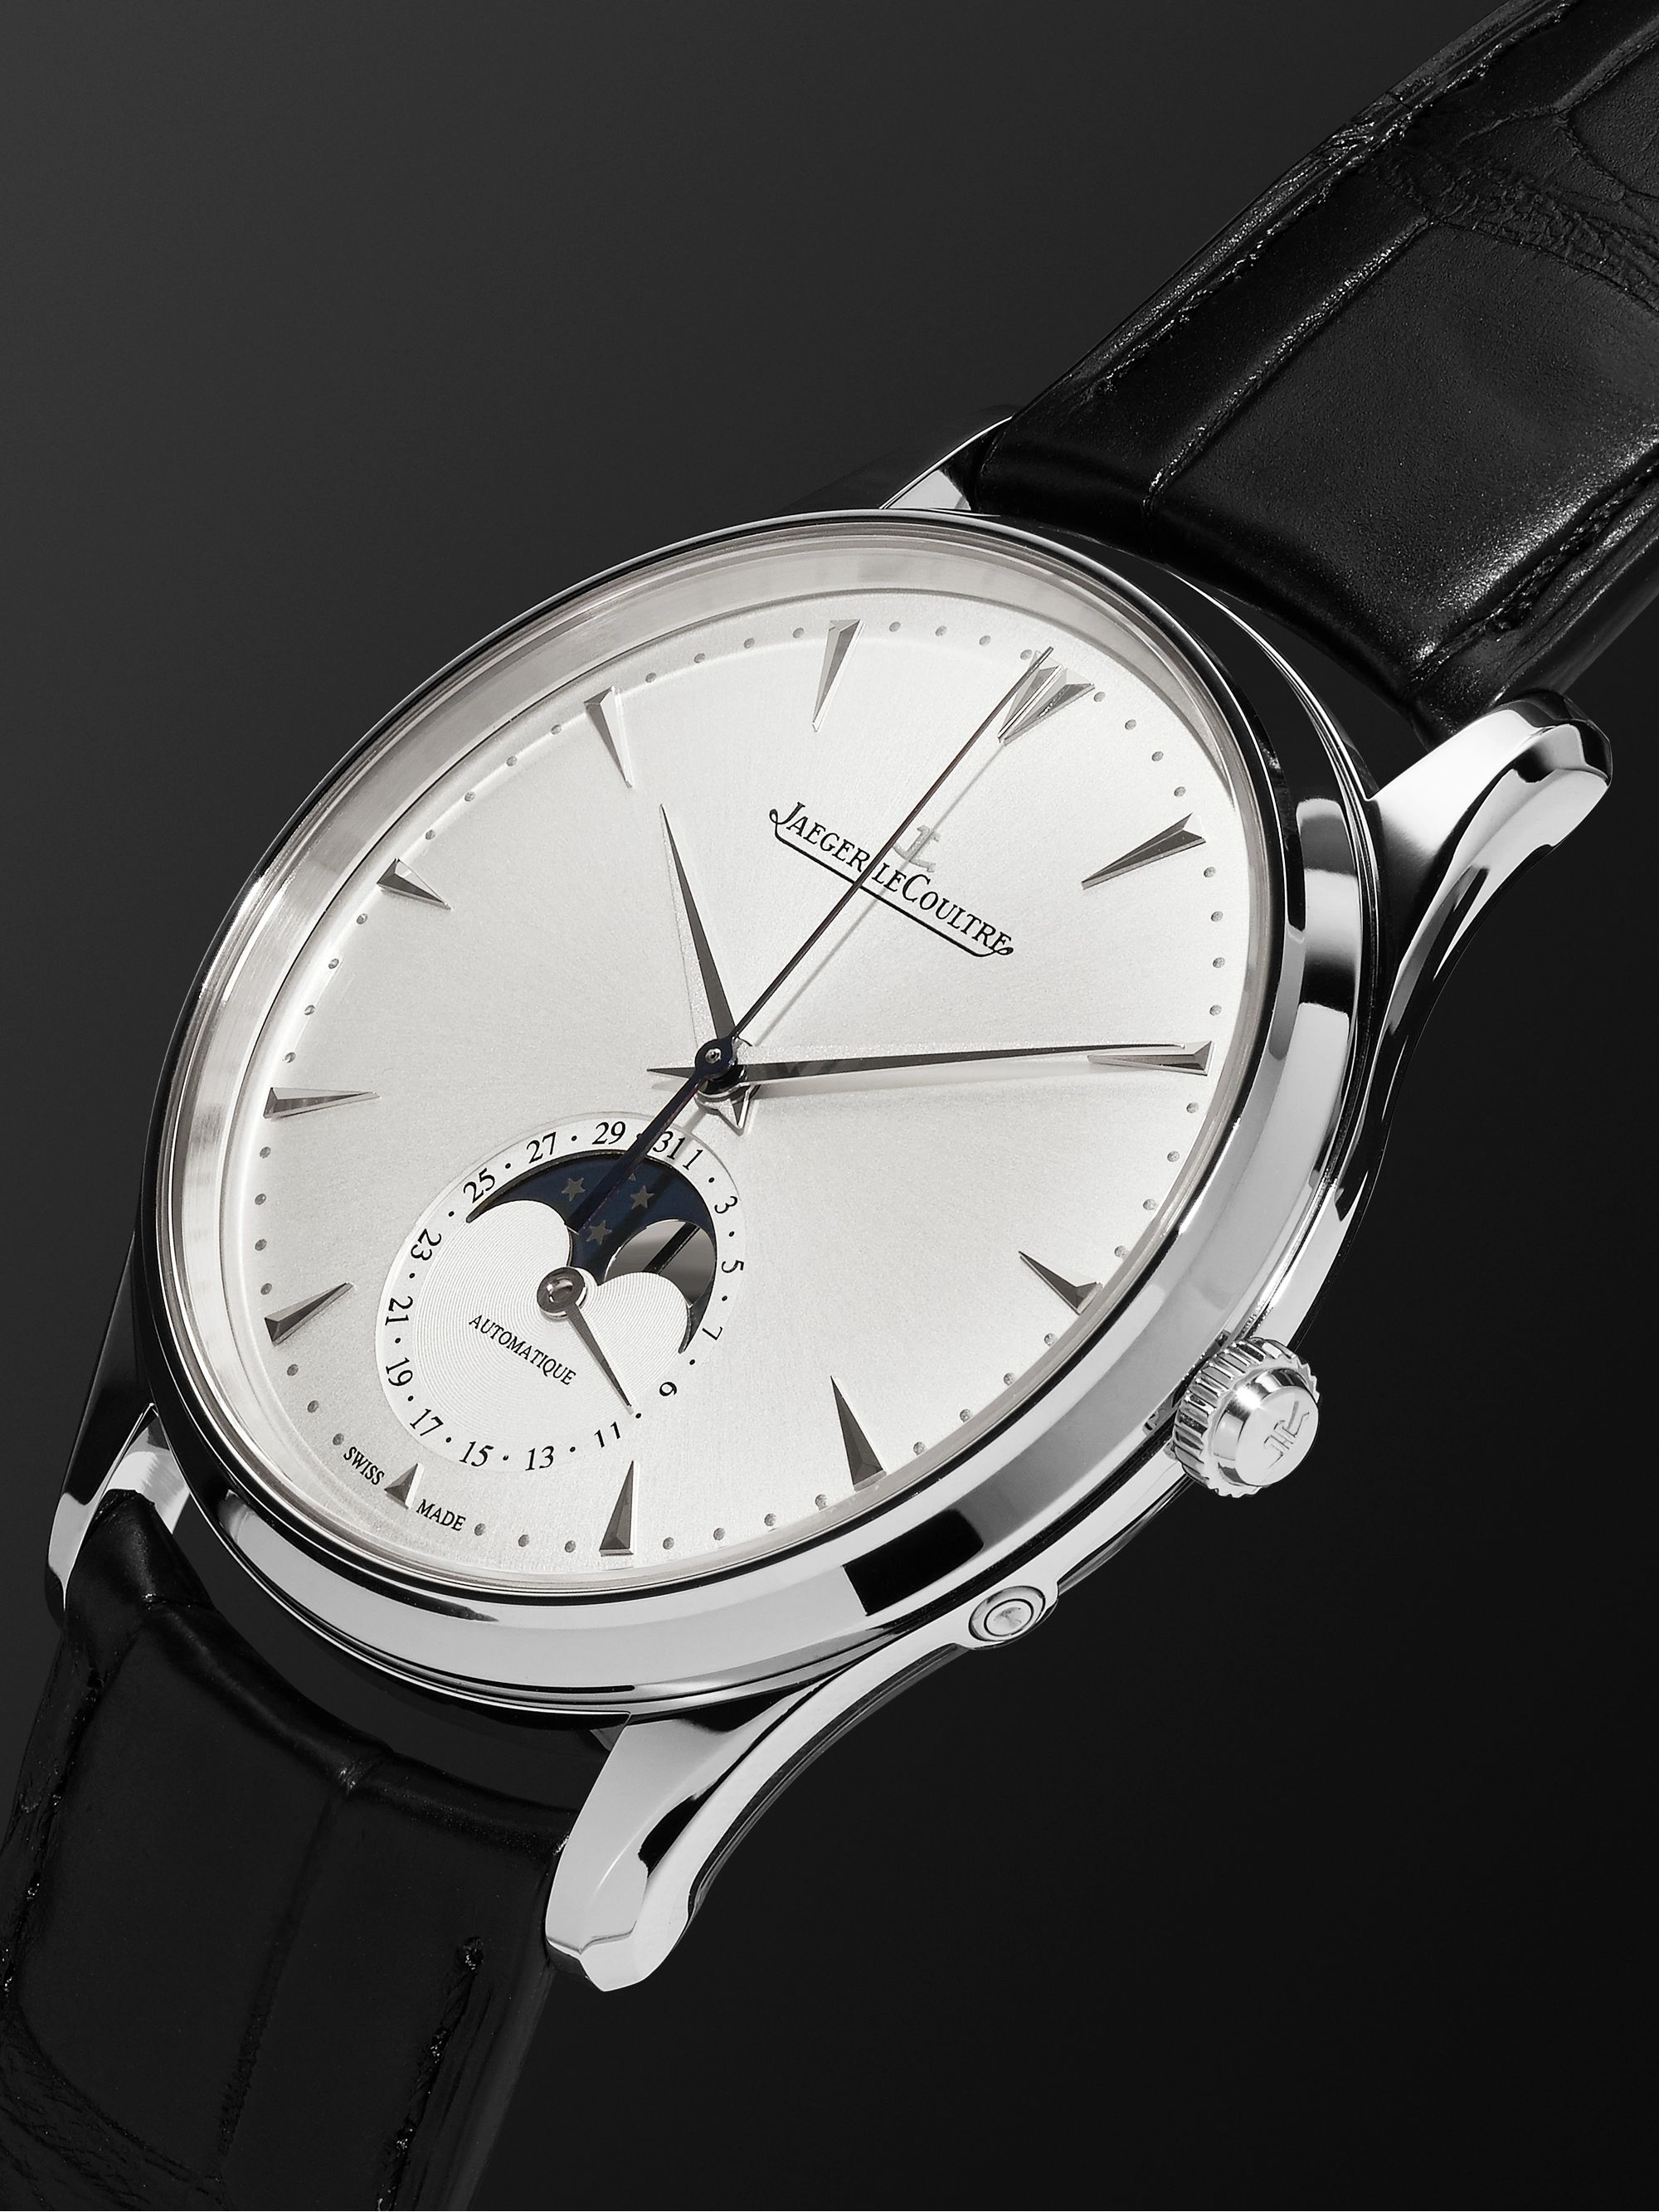 JAEGER-LECOULTRE Master Ultra Thin Moon Automatic 39mm Stainless Steel and Alligator Watch, Ref. No. JLQ1368420